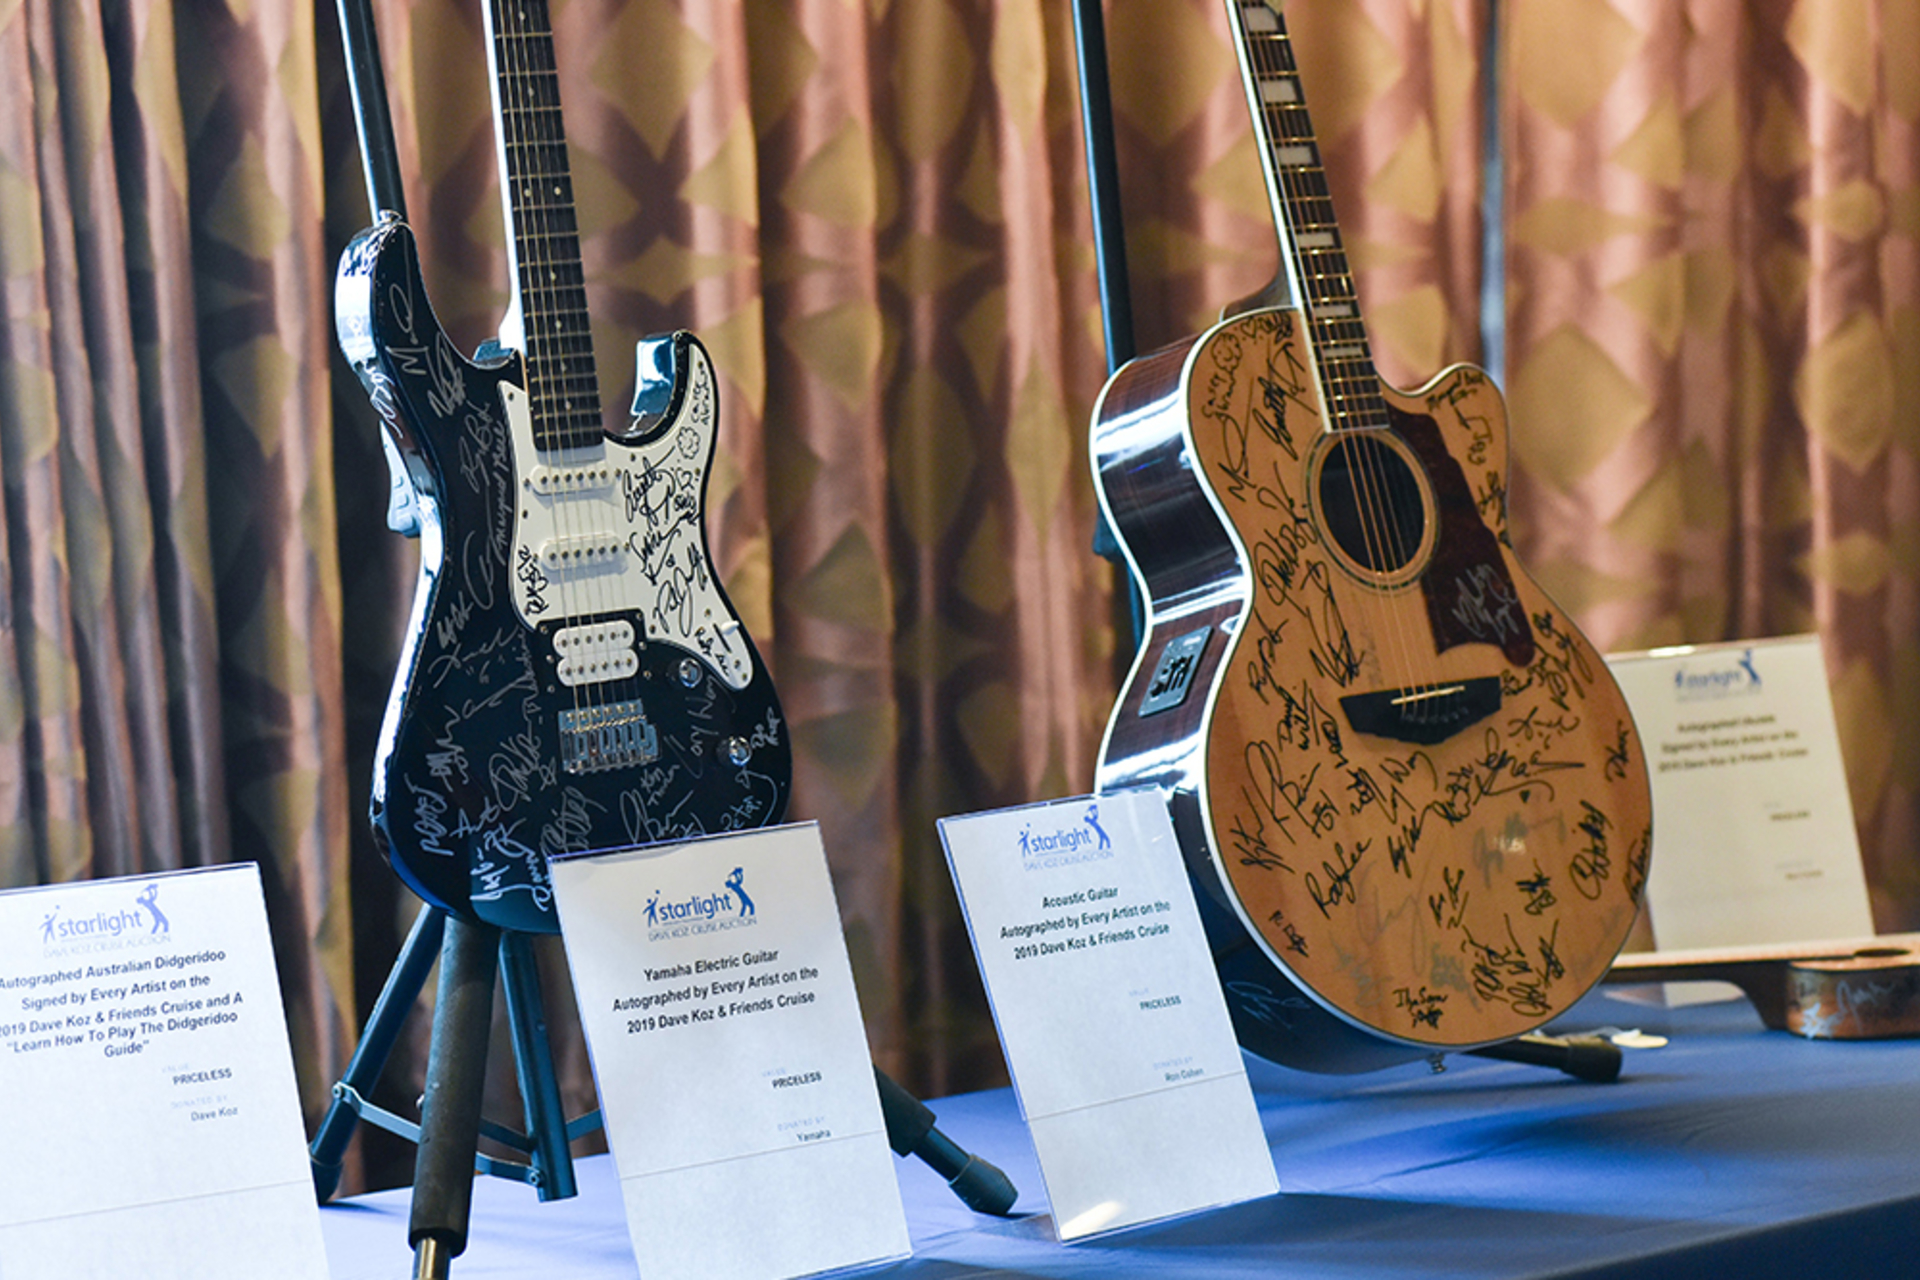 Auction items from Dave Koz's cruise